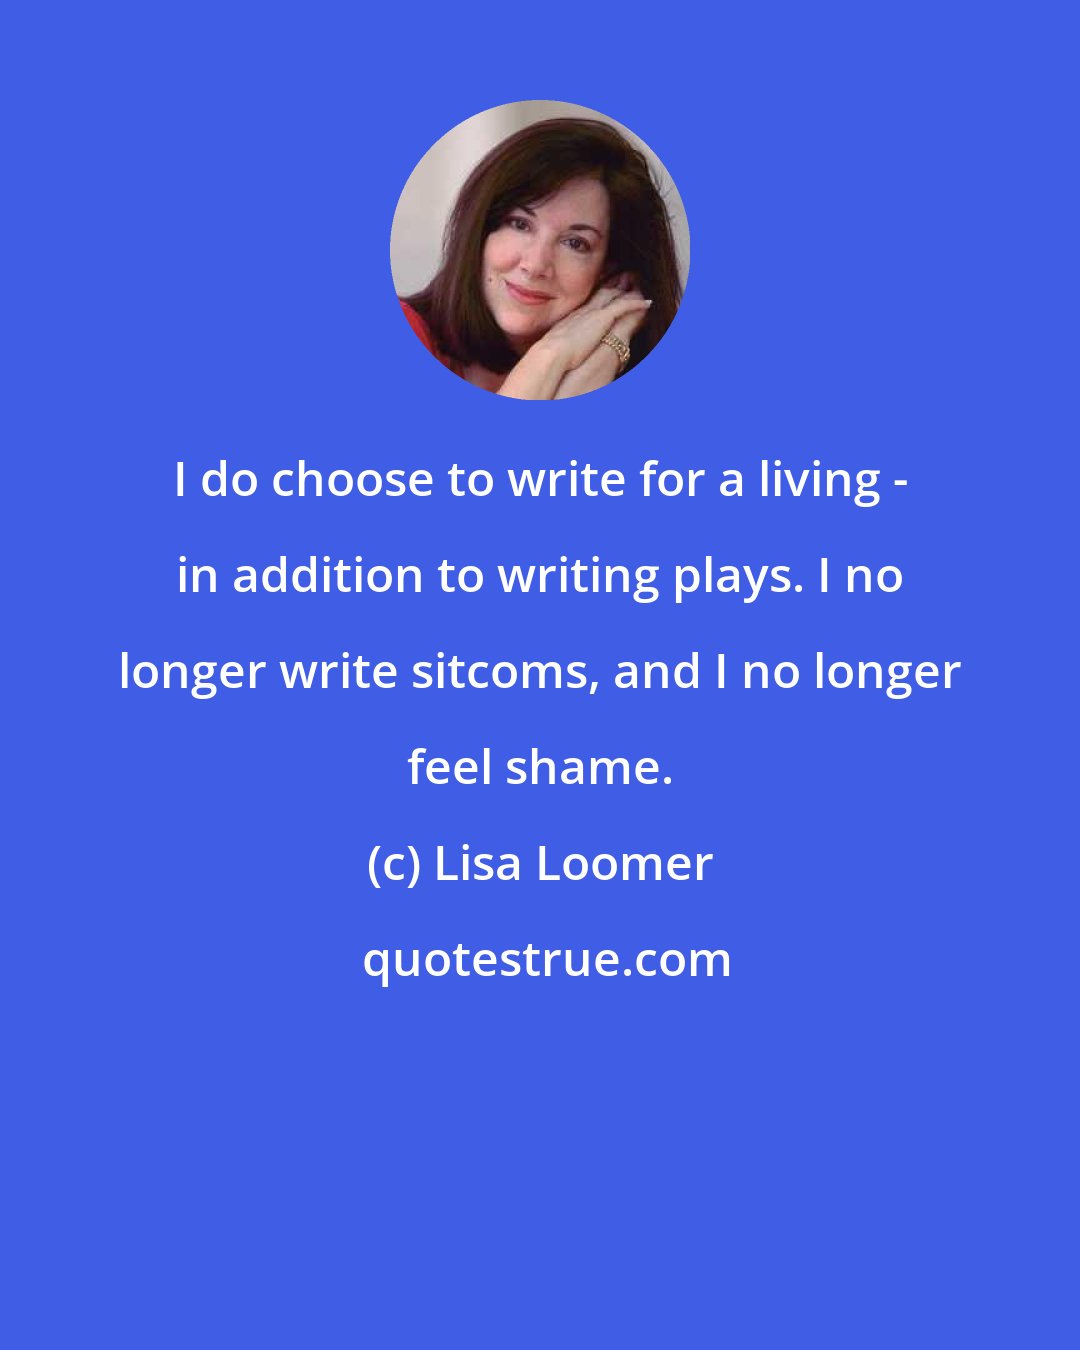 Lisa Loomer: I do choose to write for a living - in addition to writing plays. I no longer write sitcoms, and I no longer feel shame.